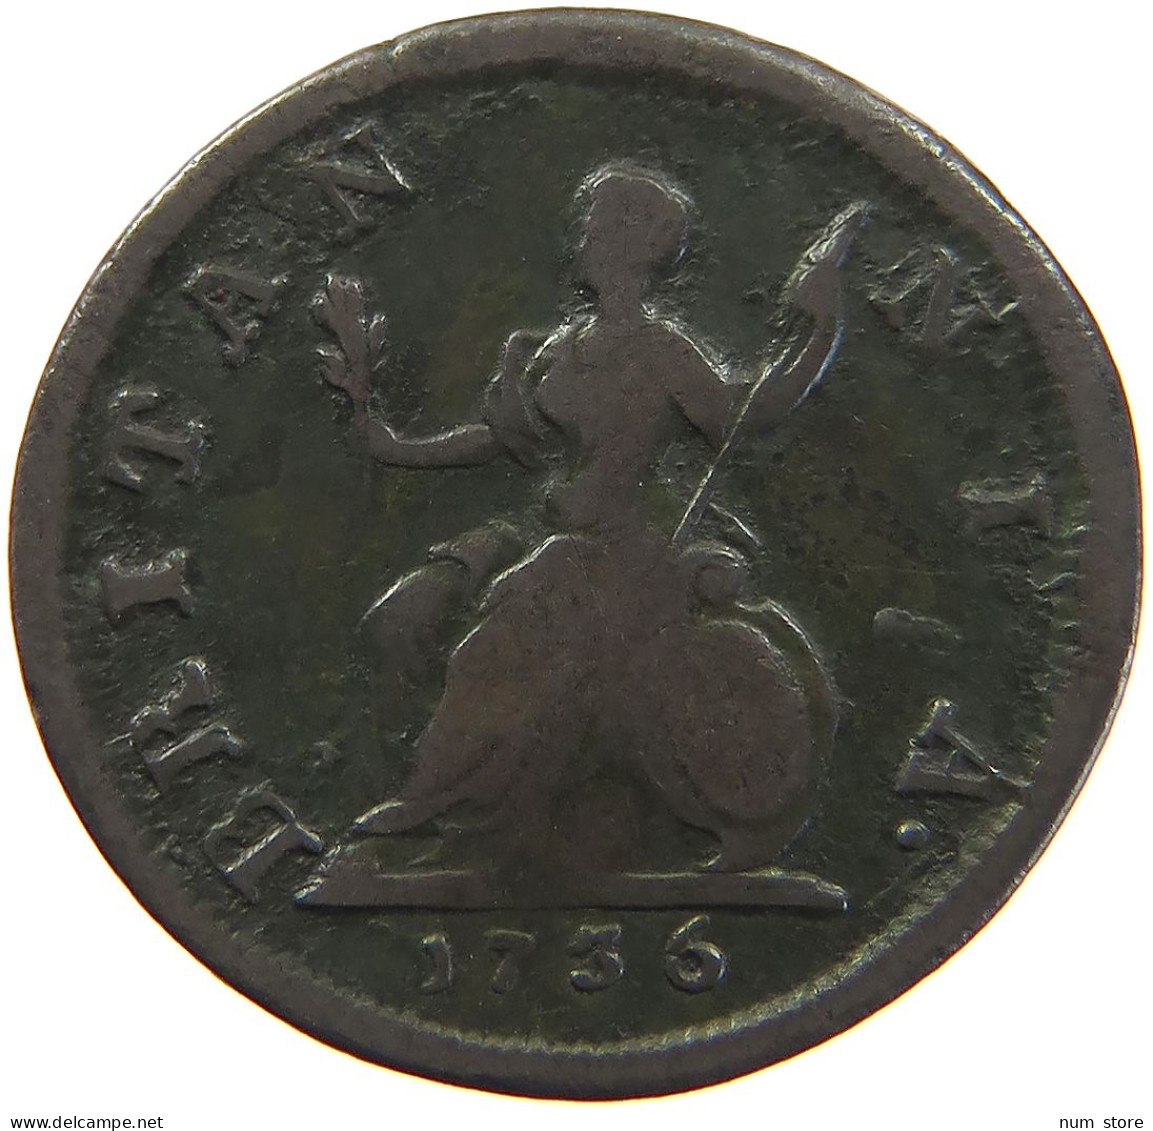 GREAT BRITAIN FARTHING 1736 George II. 1727-1760. #t021 0145 - A. 1 Farthing